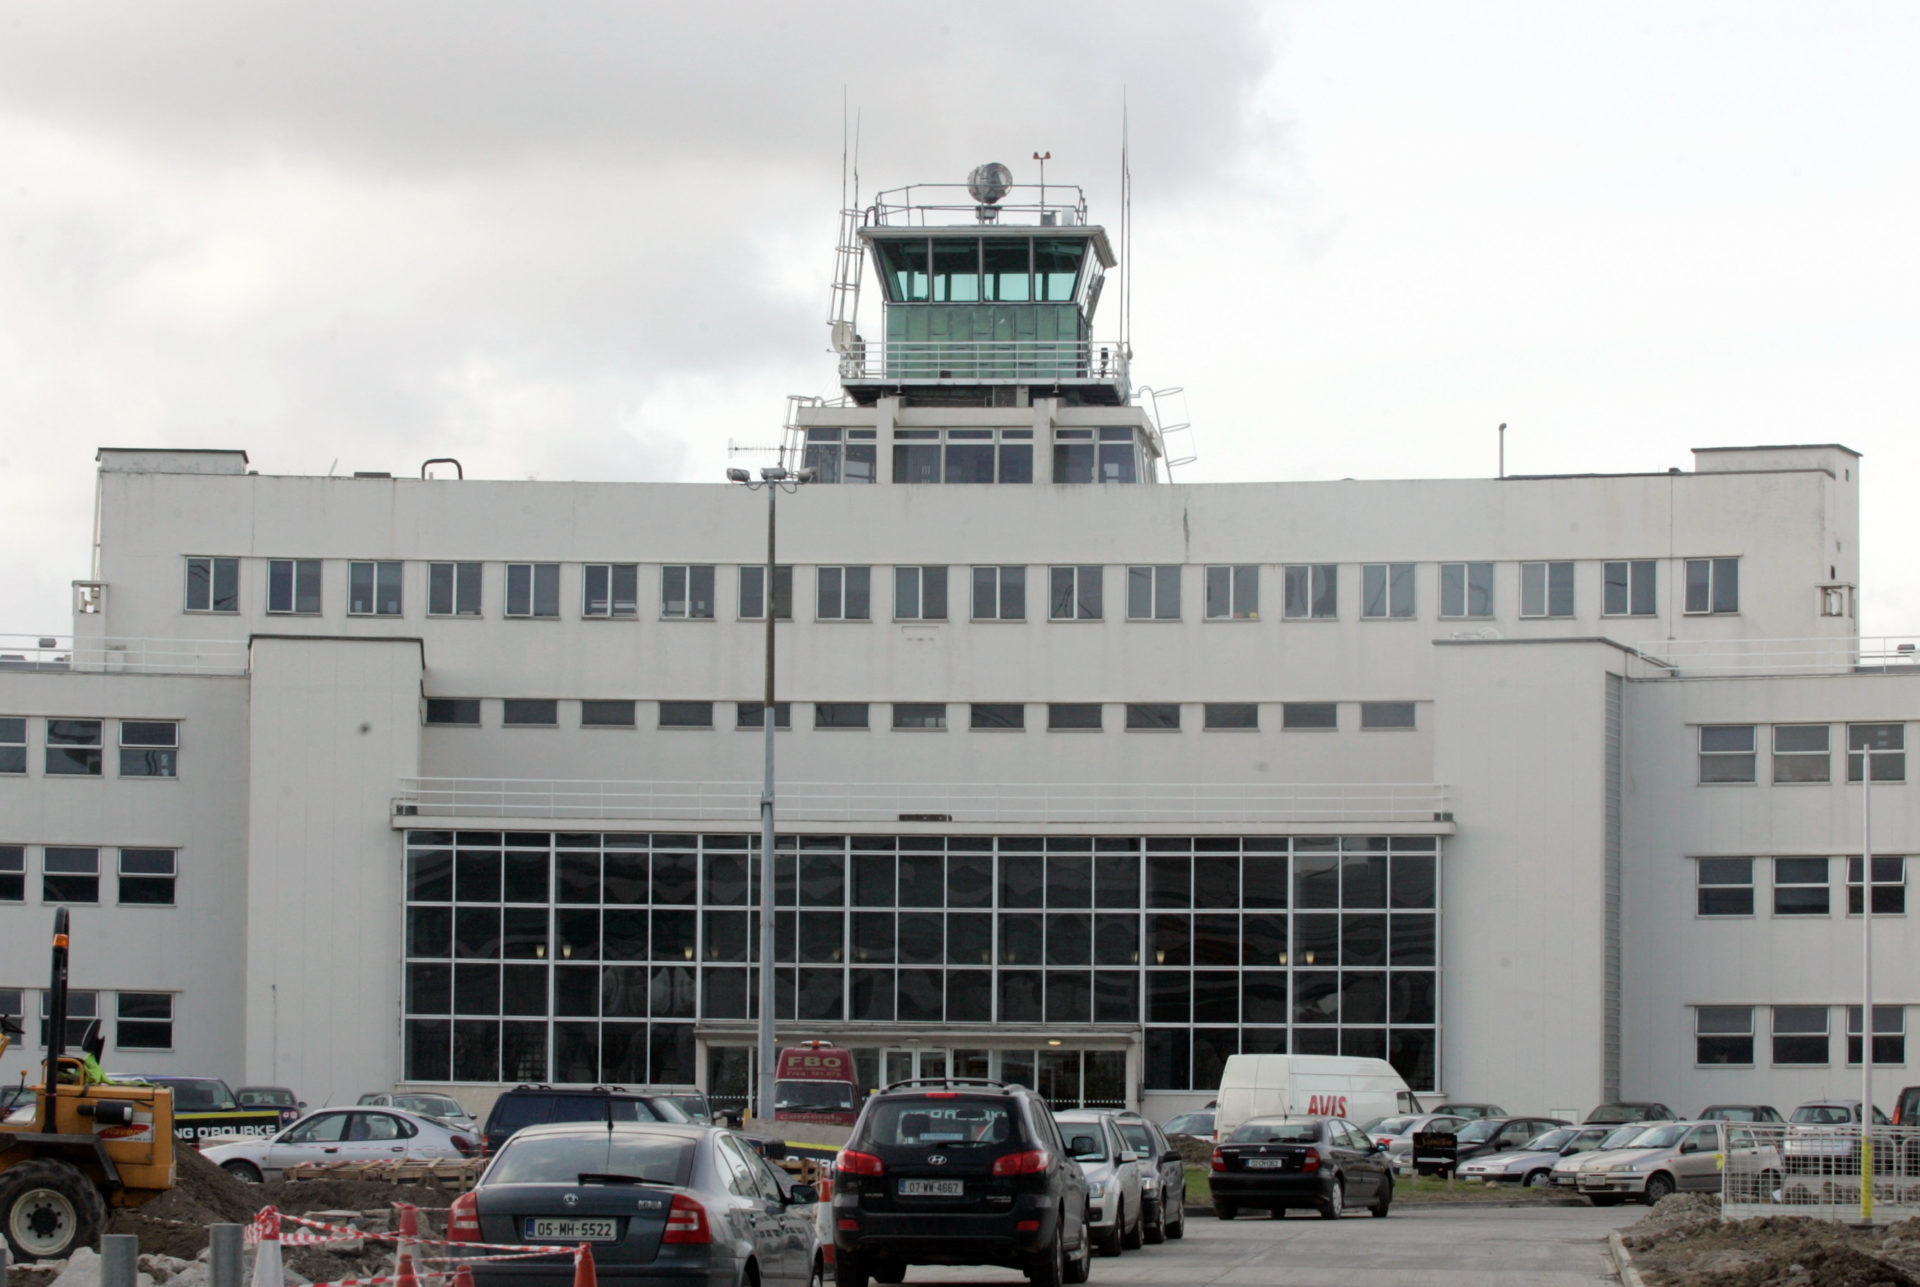 File photo of the old terminal building at Dublin Airport, where people who arrived from Ukraine are being accommodated.